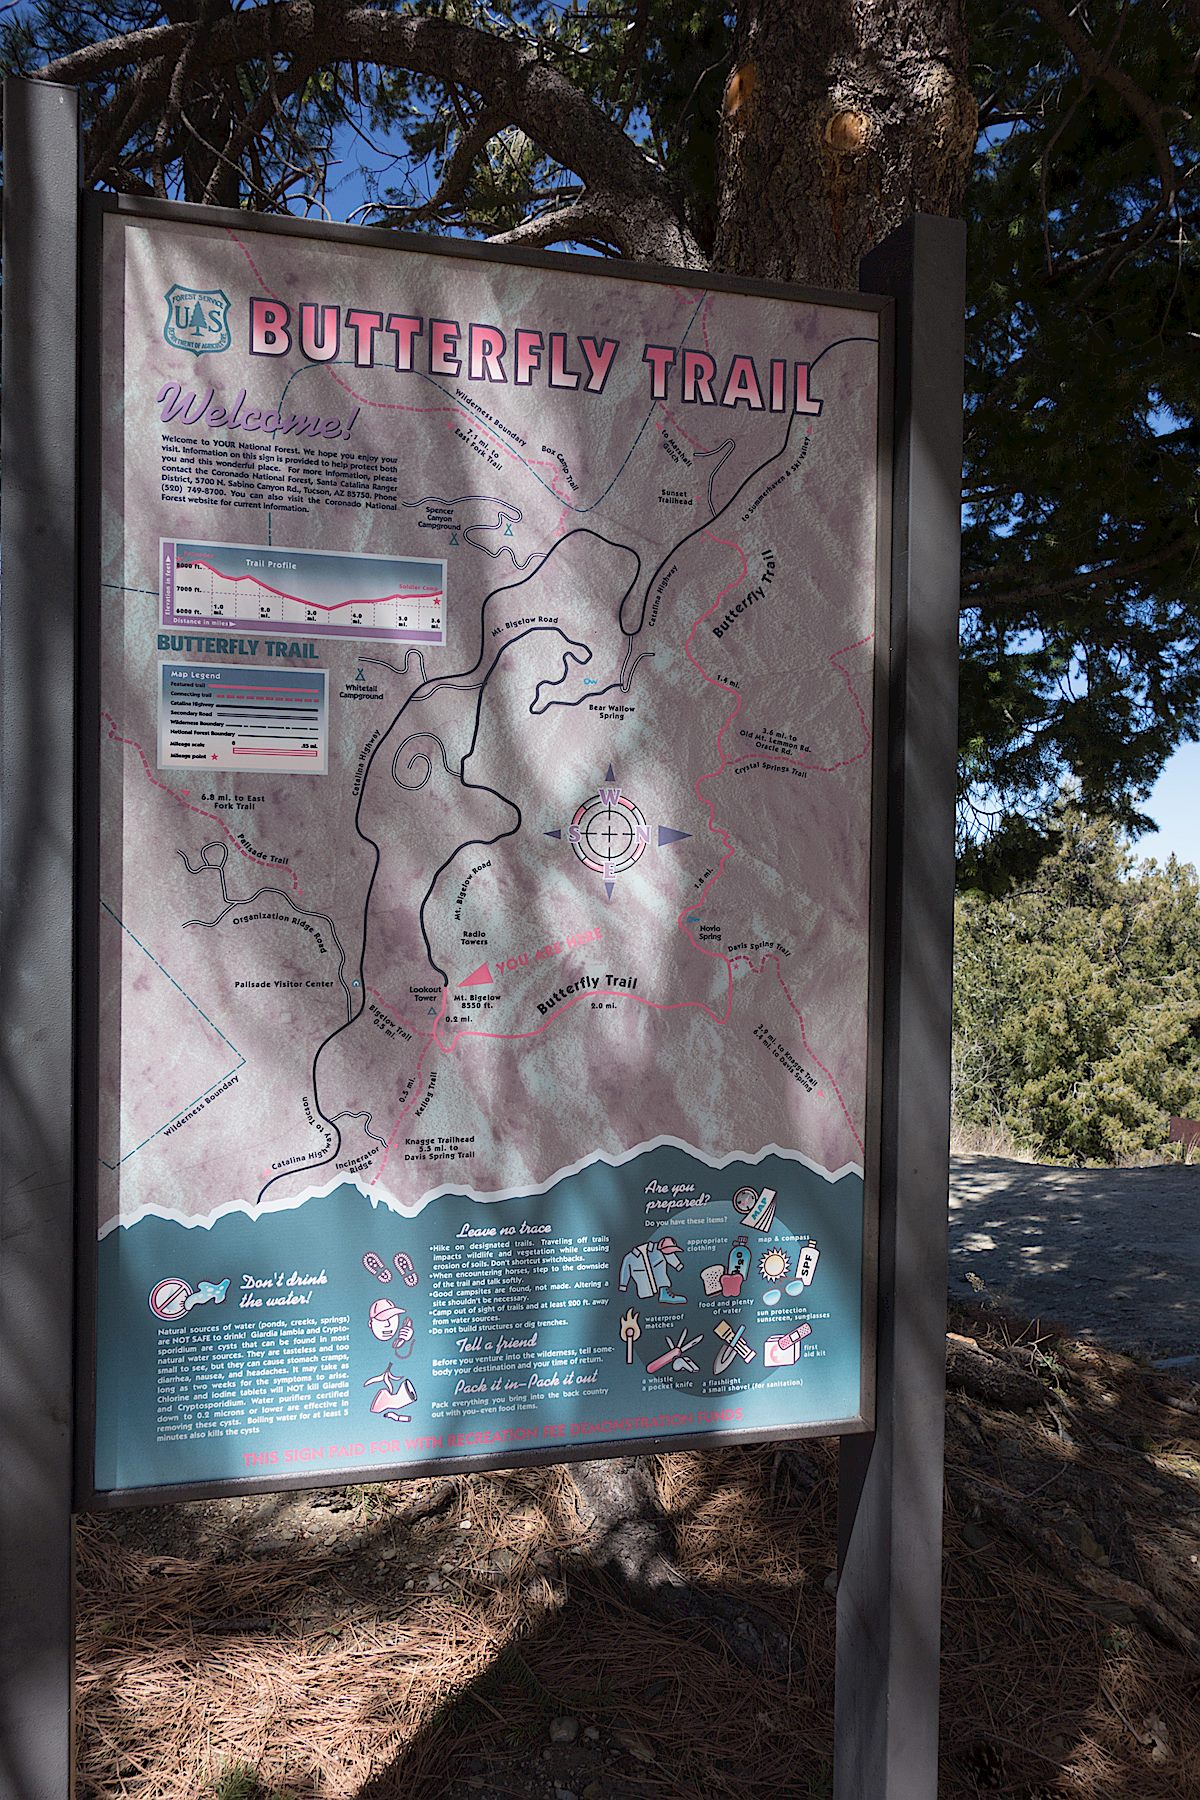 Large trailhead sign for the Butterfly Trail near the dirt parking area. April 2014.